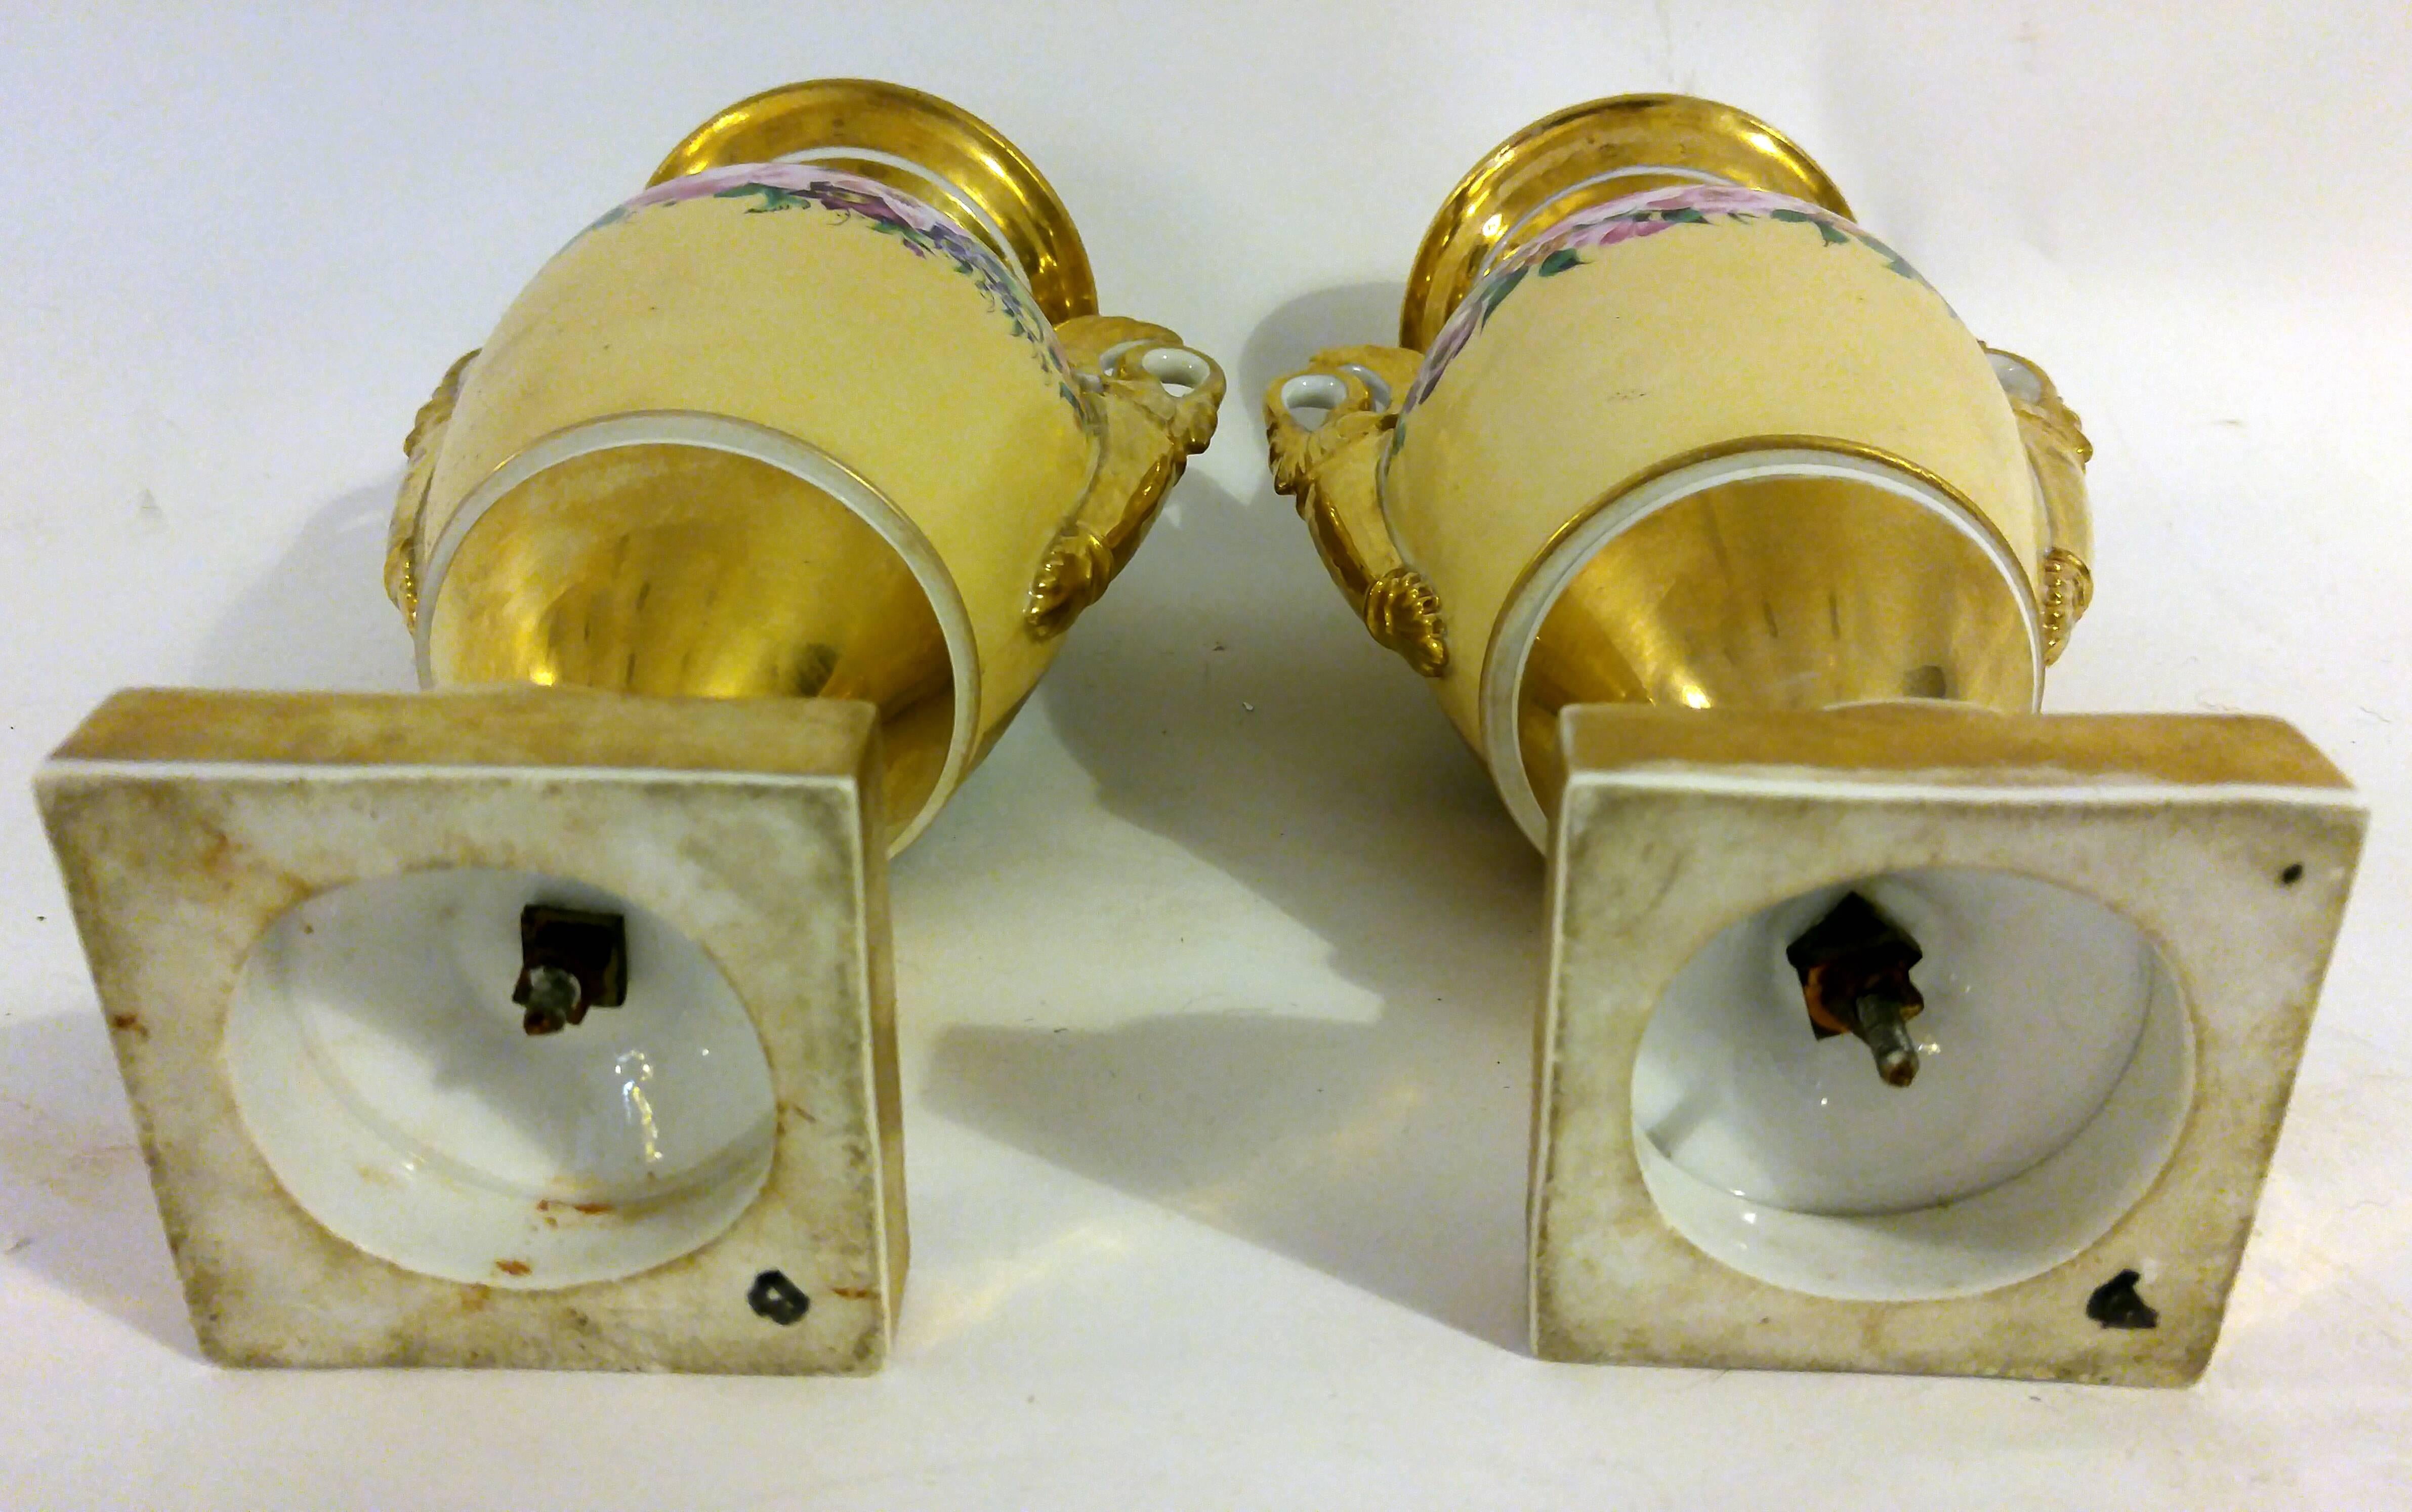 19th century Old Paris Porcelain Urn Pair with Swan Handles In Good Condition For Sale In Savannah, GA